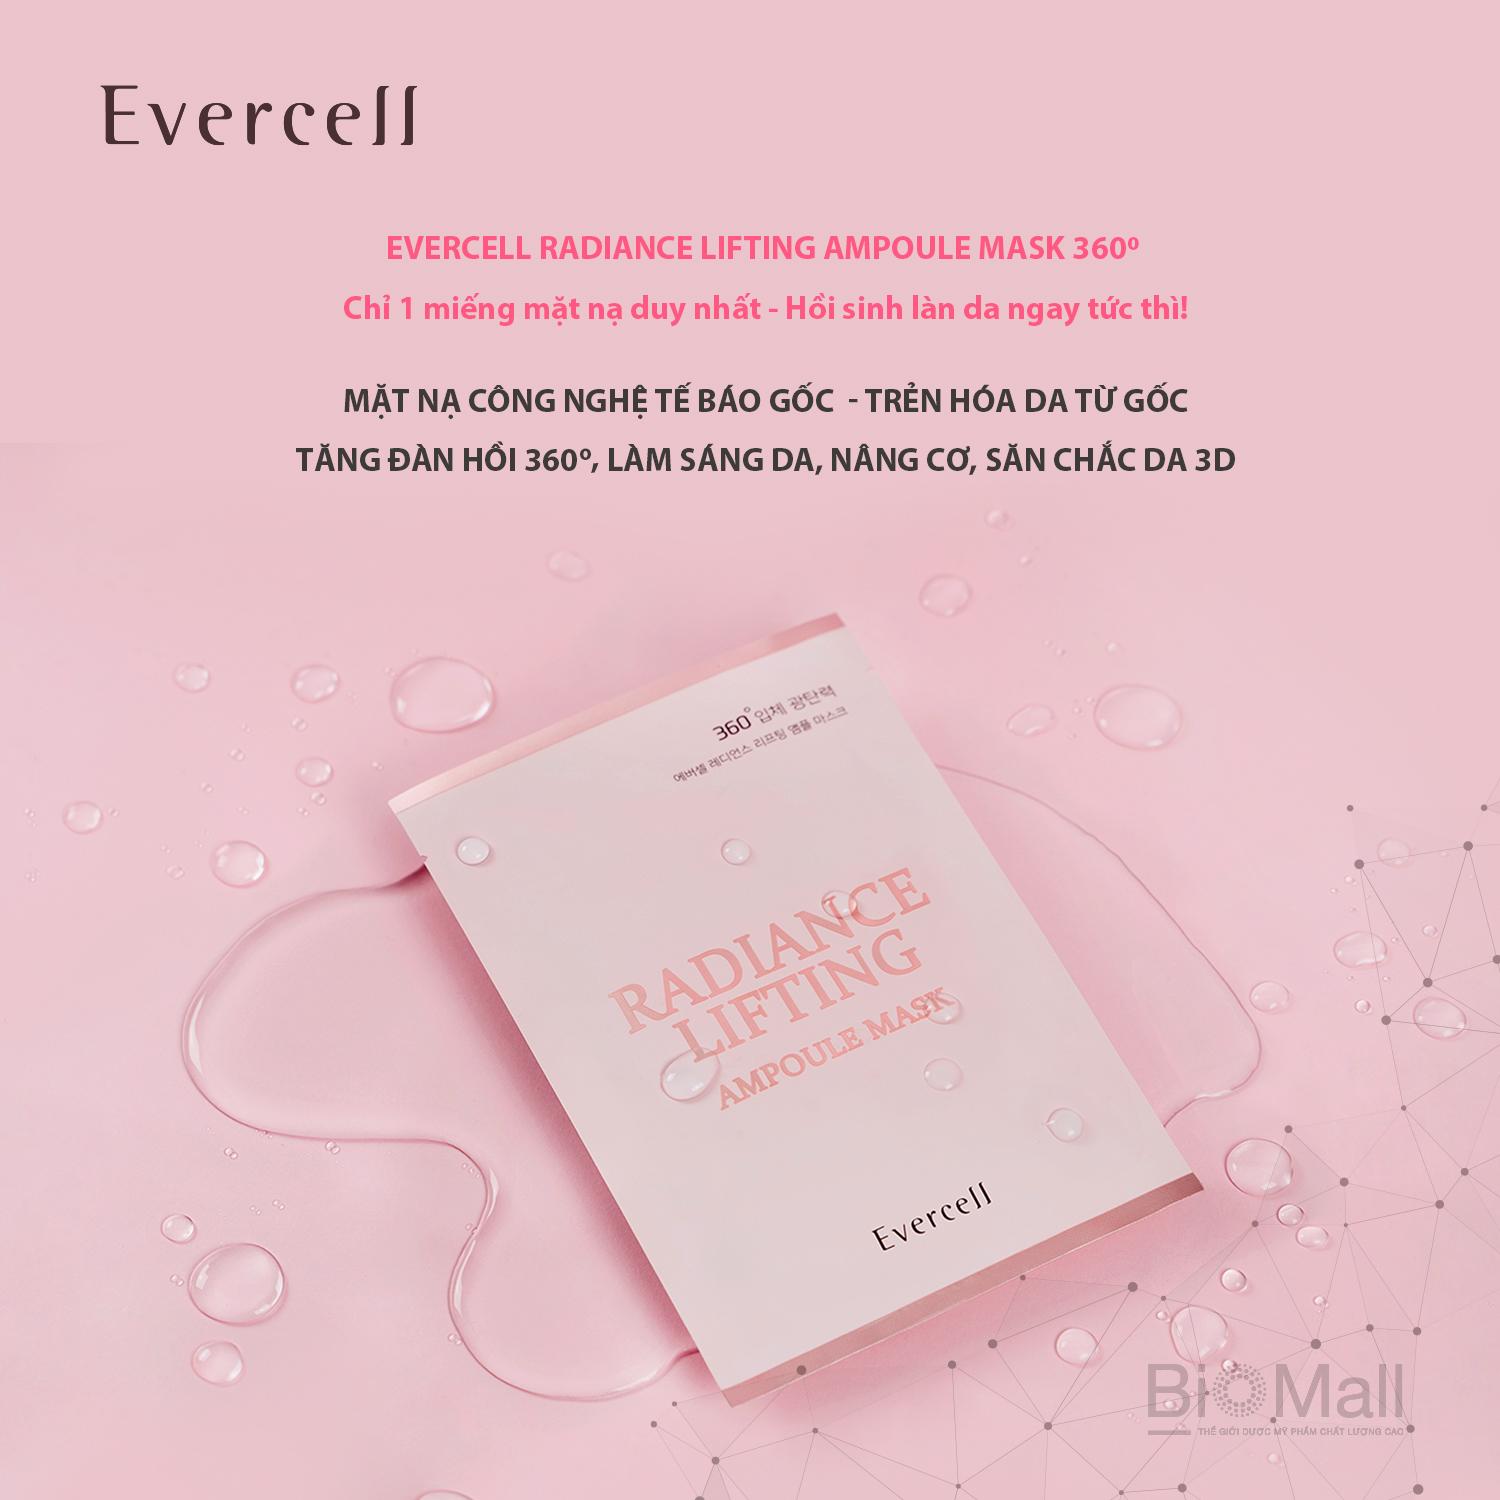 Evercell Radiance Lifting Ampoule Mask 360